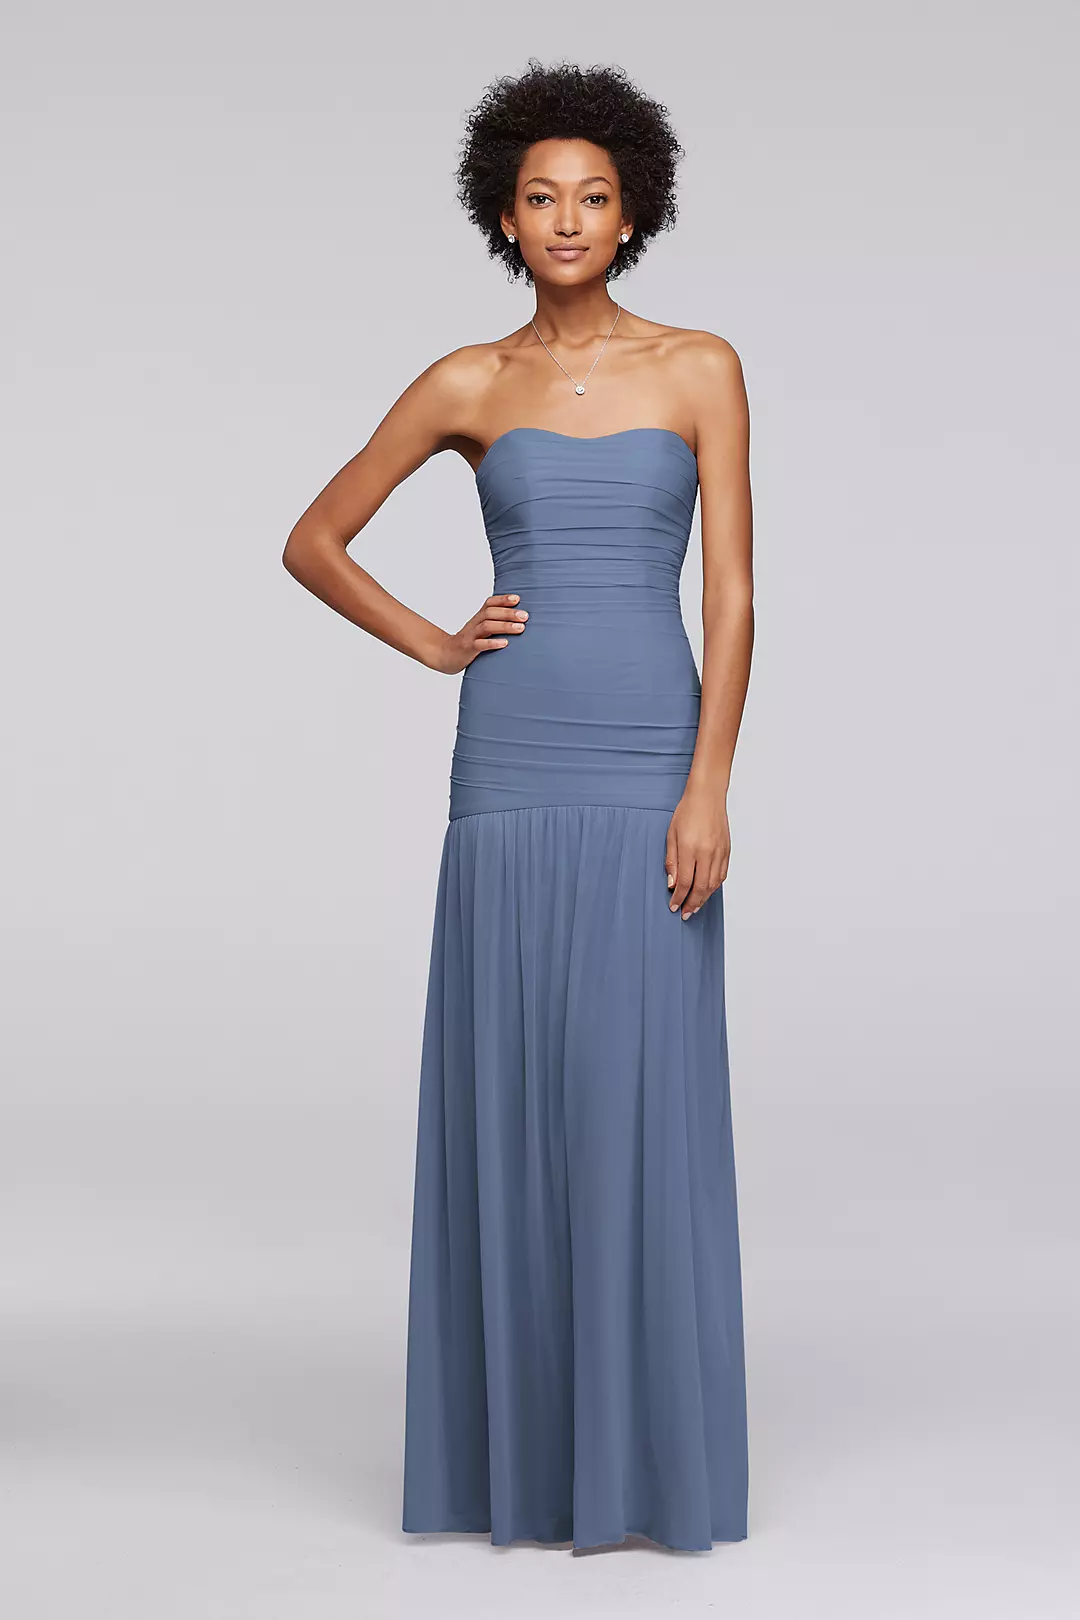 Long Fit and Flare Strapless Bridesmaid Dress  Image